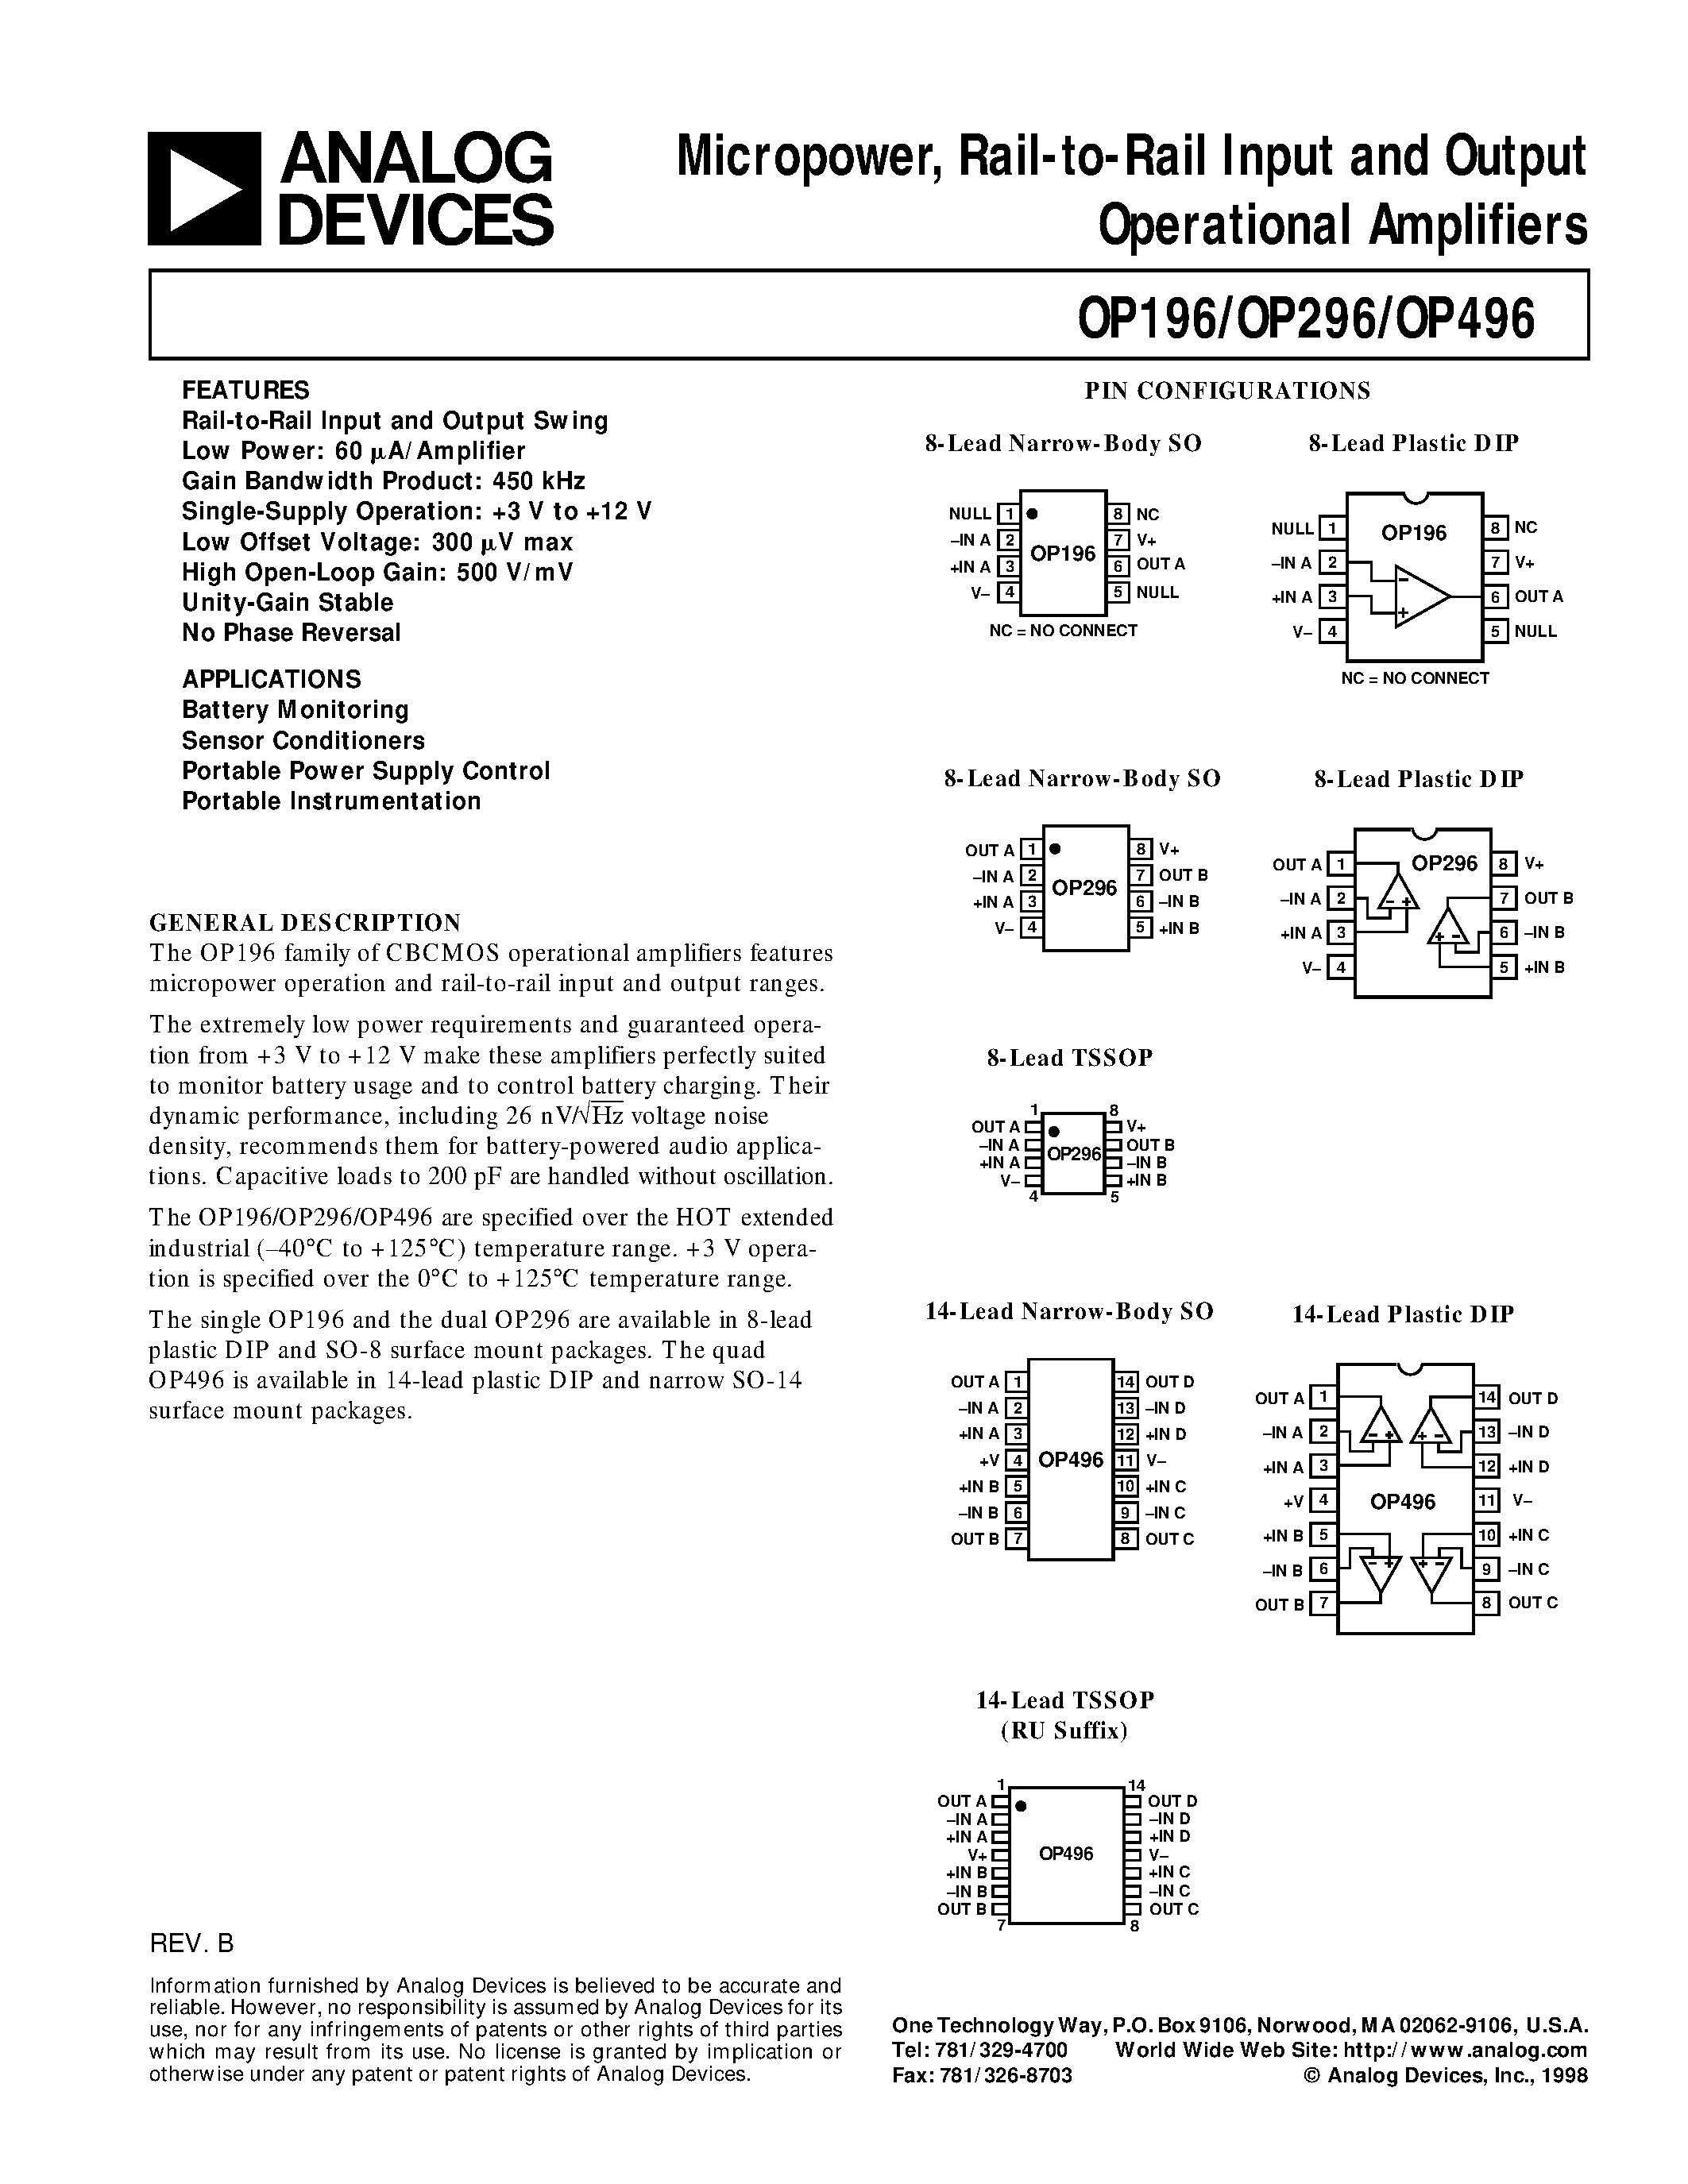 Даташит OP296 - Micropower / Rail-to-Rail Input and Output Operational Amplifiers страница 1